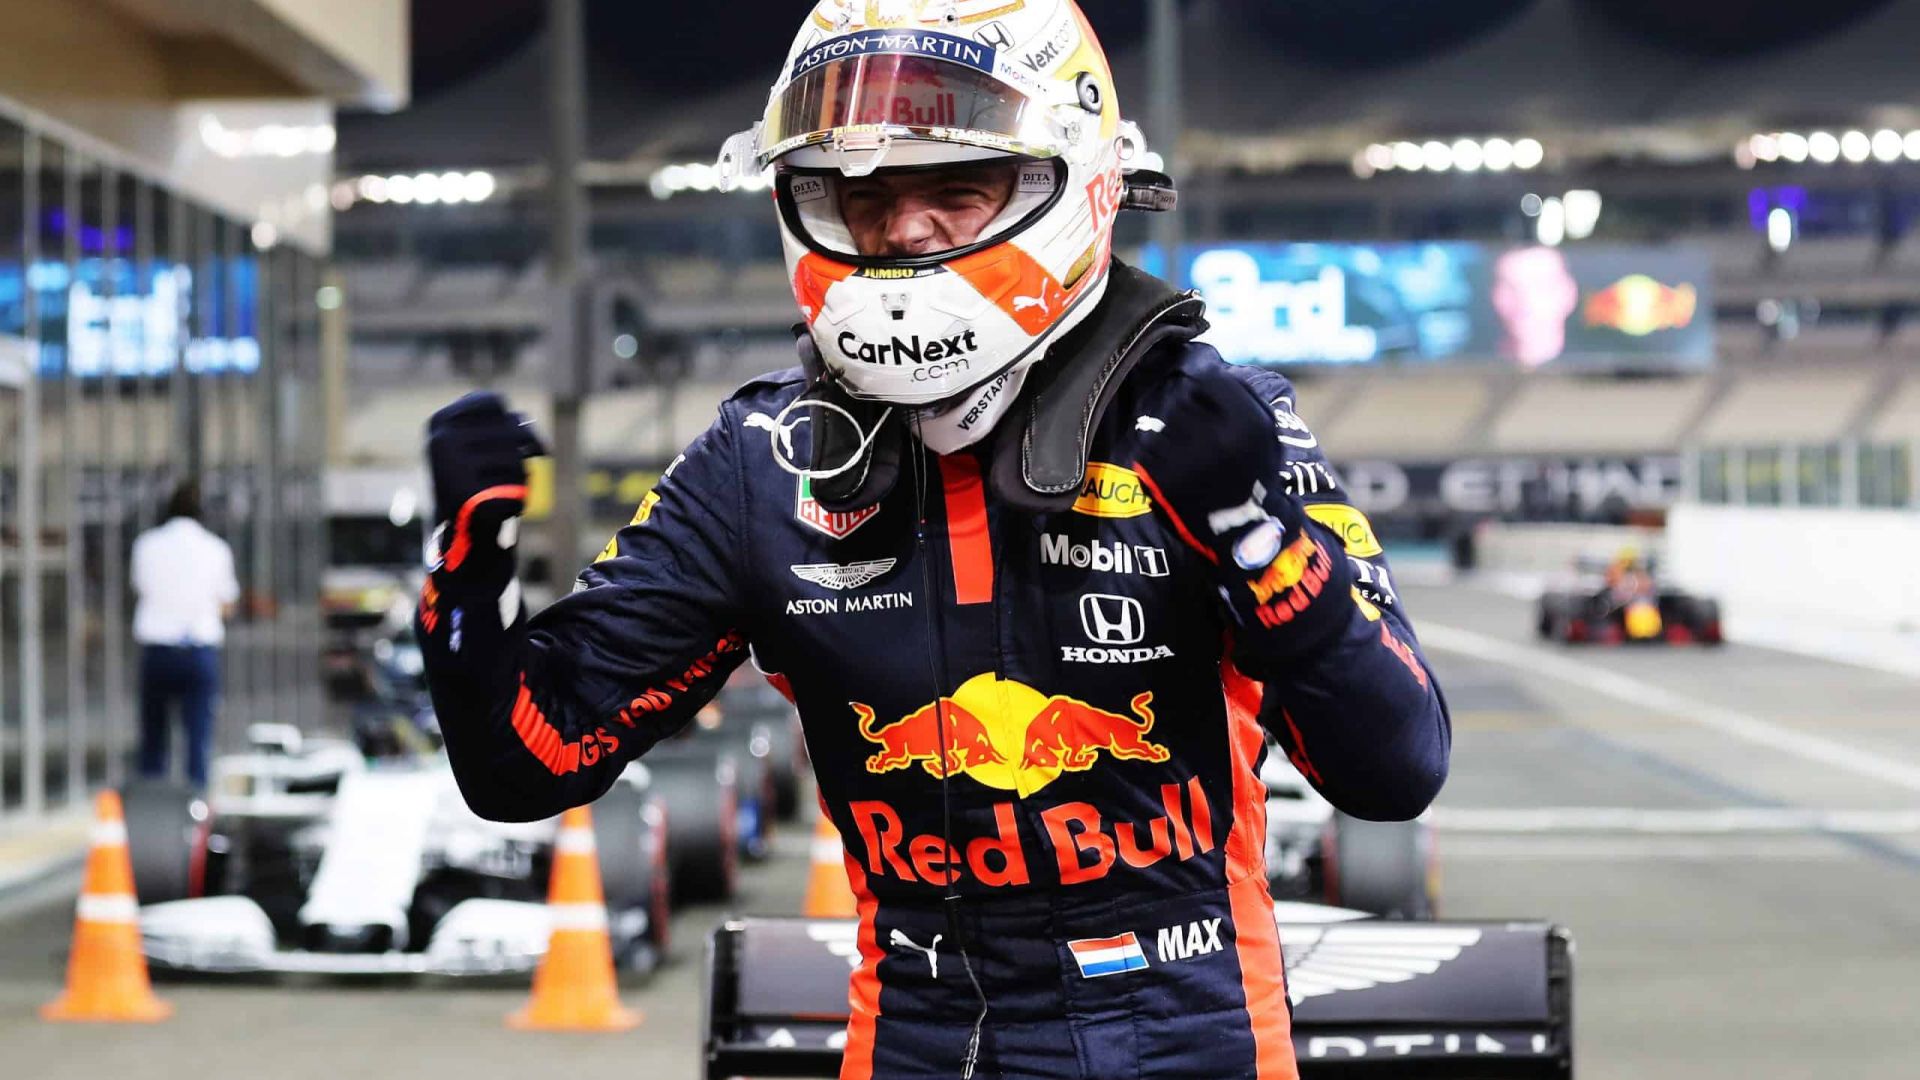 2020 Abu Dhabi Grand Prix, Saturday - Max Verstappen with his HANS device still on (image courtesy Red Bull Racing)